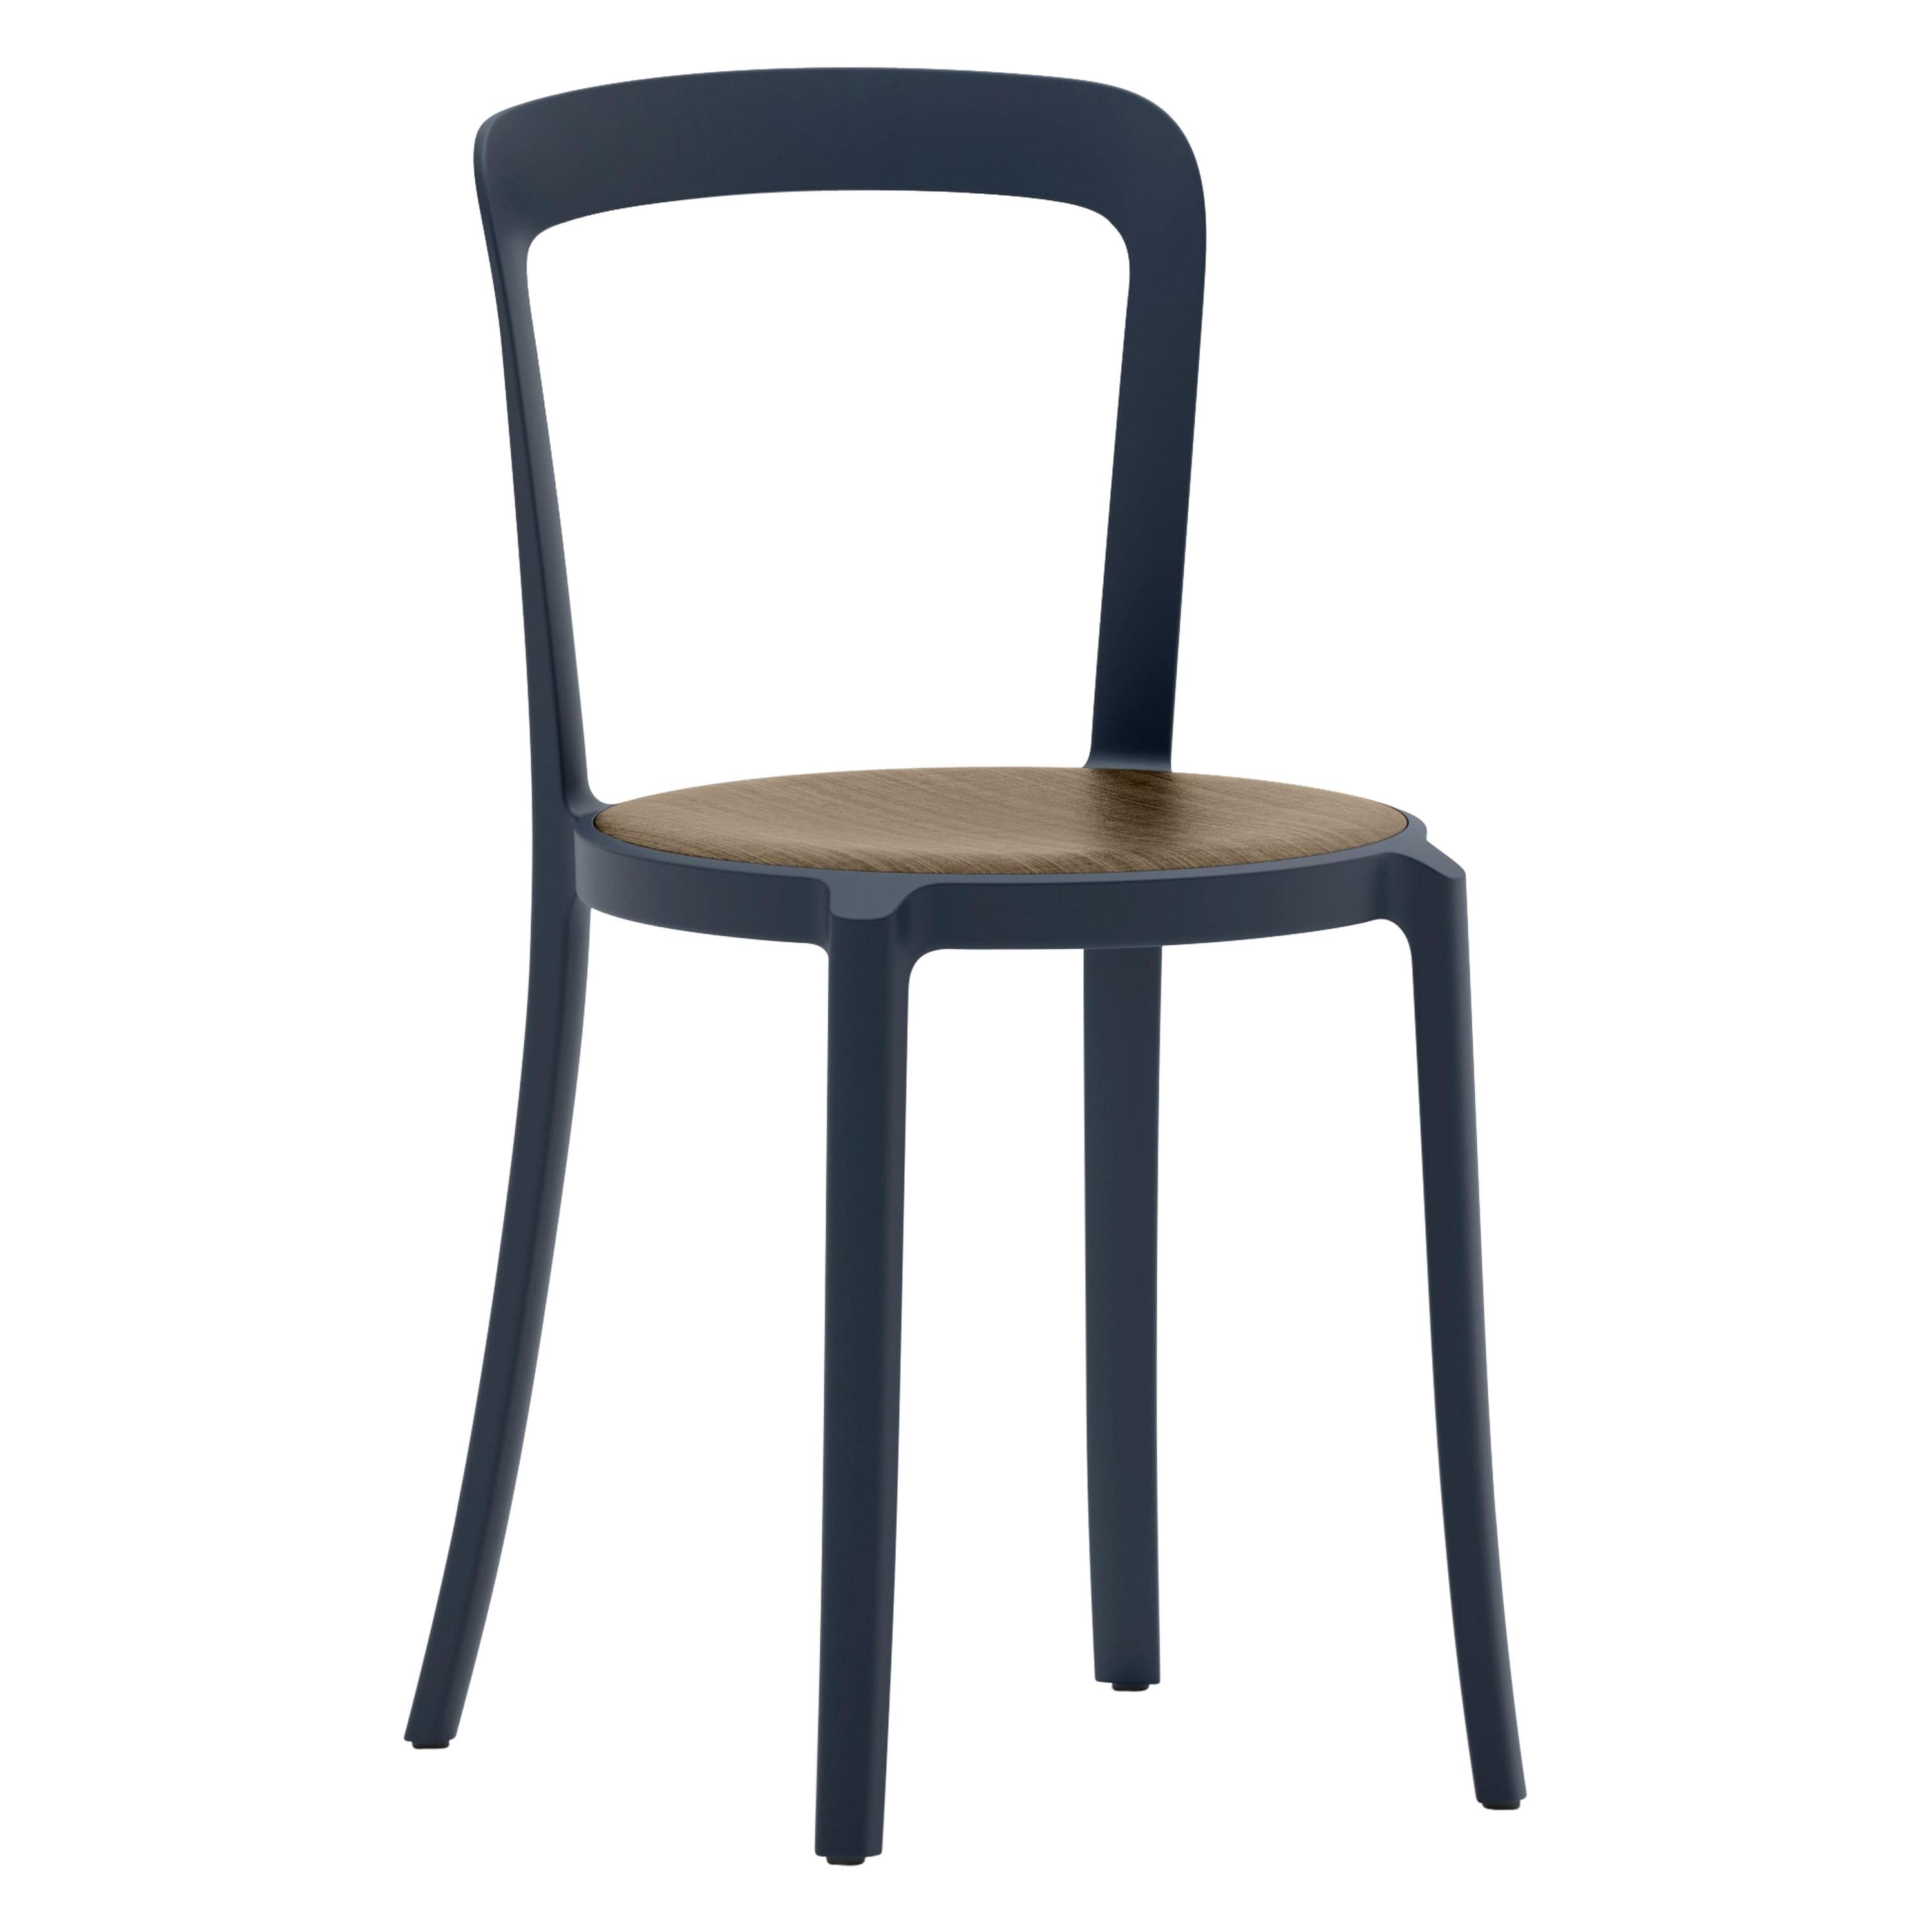 Emeco On & On Stacking Chair in Dark Blue with Walnut seat by Barber & Osgerby For Sale